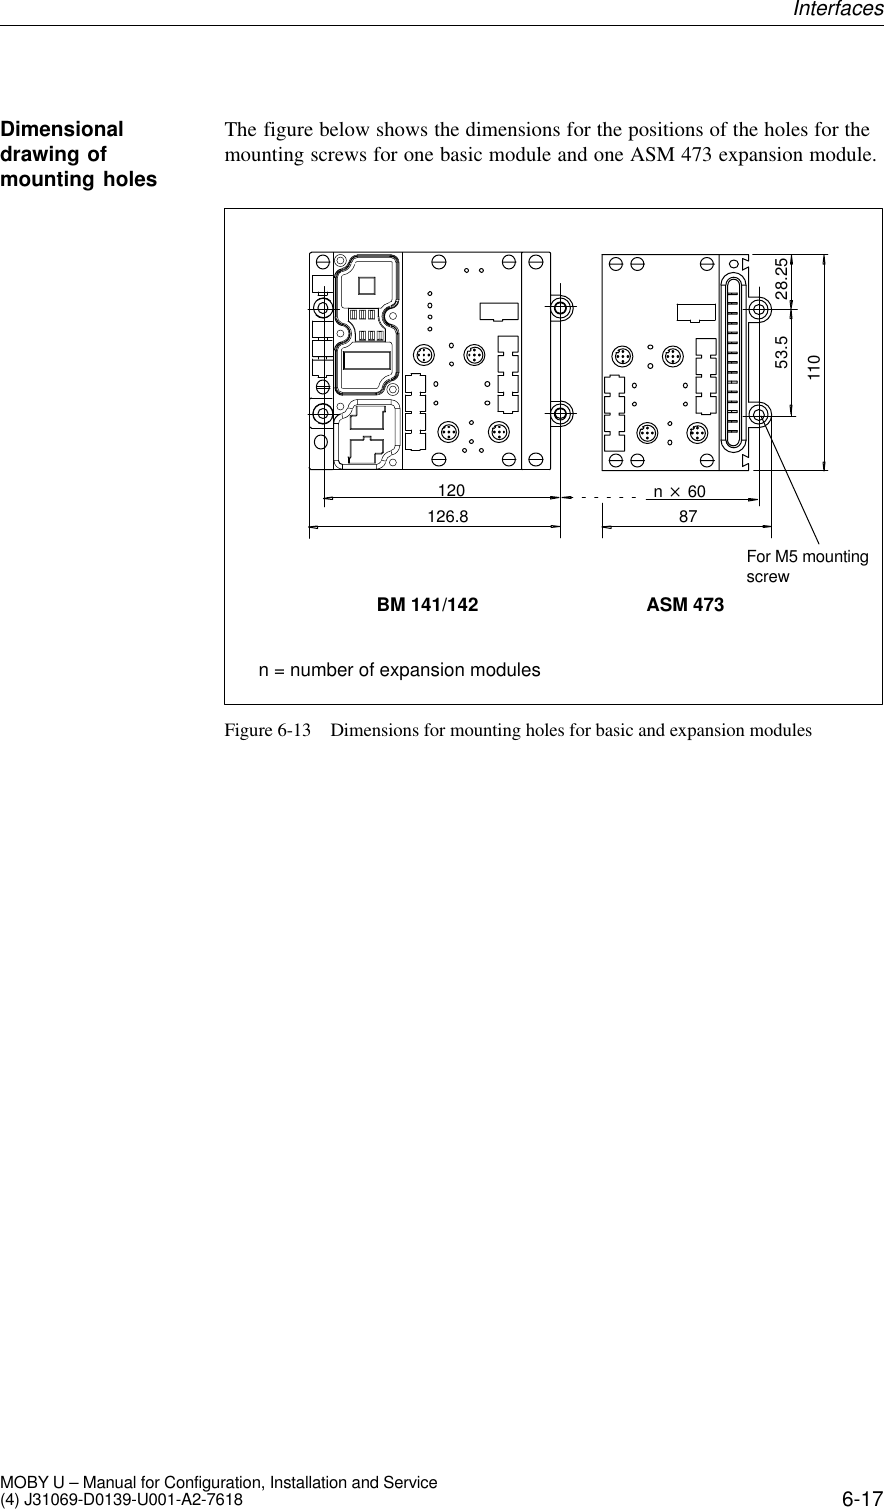 6-17MOBY U – Manual for Configuration, Installation and Service(4) J31069-D0139-U001-A2-7618The figure below shows the dimensions for the positions of the holes for themounting screws for one basic module and one ASM 473 expansion module.n  6012053.5n = number of expansion modules28.25126.8BM 141/142 ASM 47387110For M5 mountingscrewFigure 6-13 Dimensions for mounting holes for basic and expansion modulesDimensionaldrawing ofmounting holesInterfaces